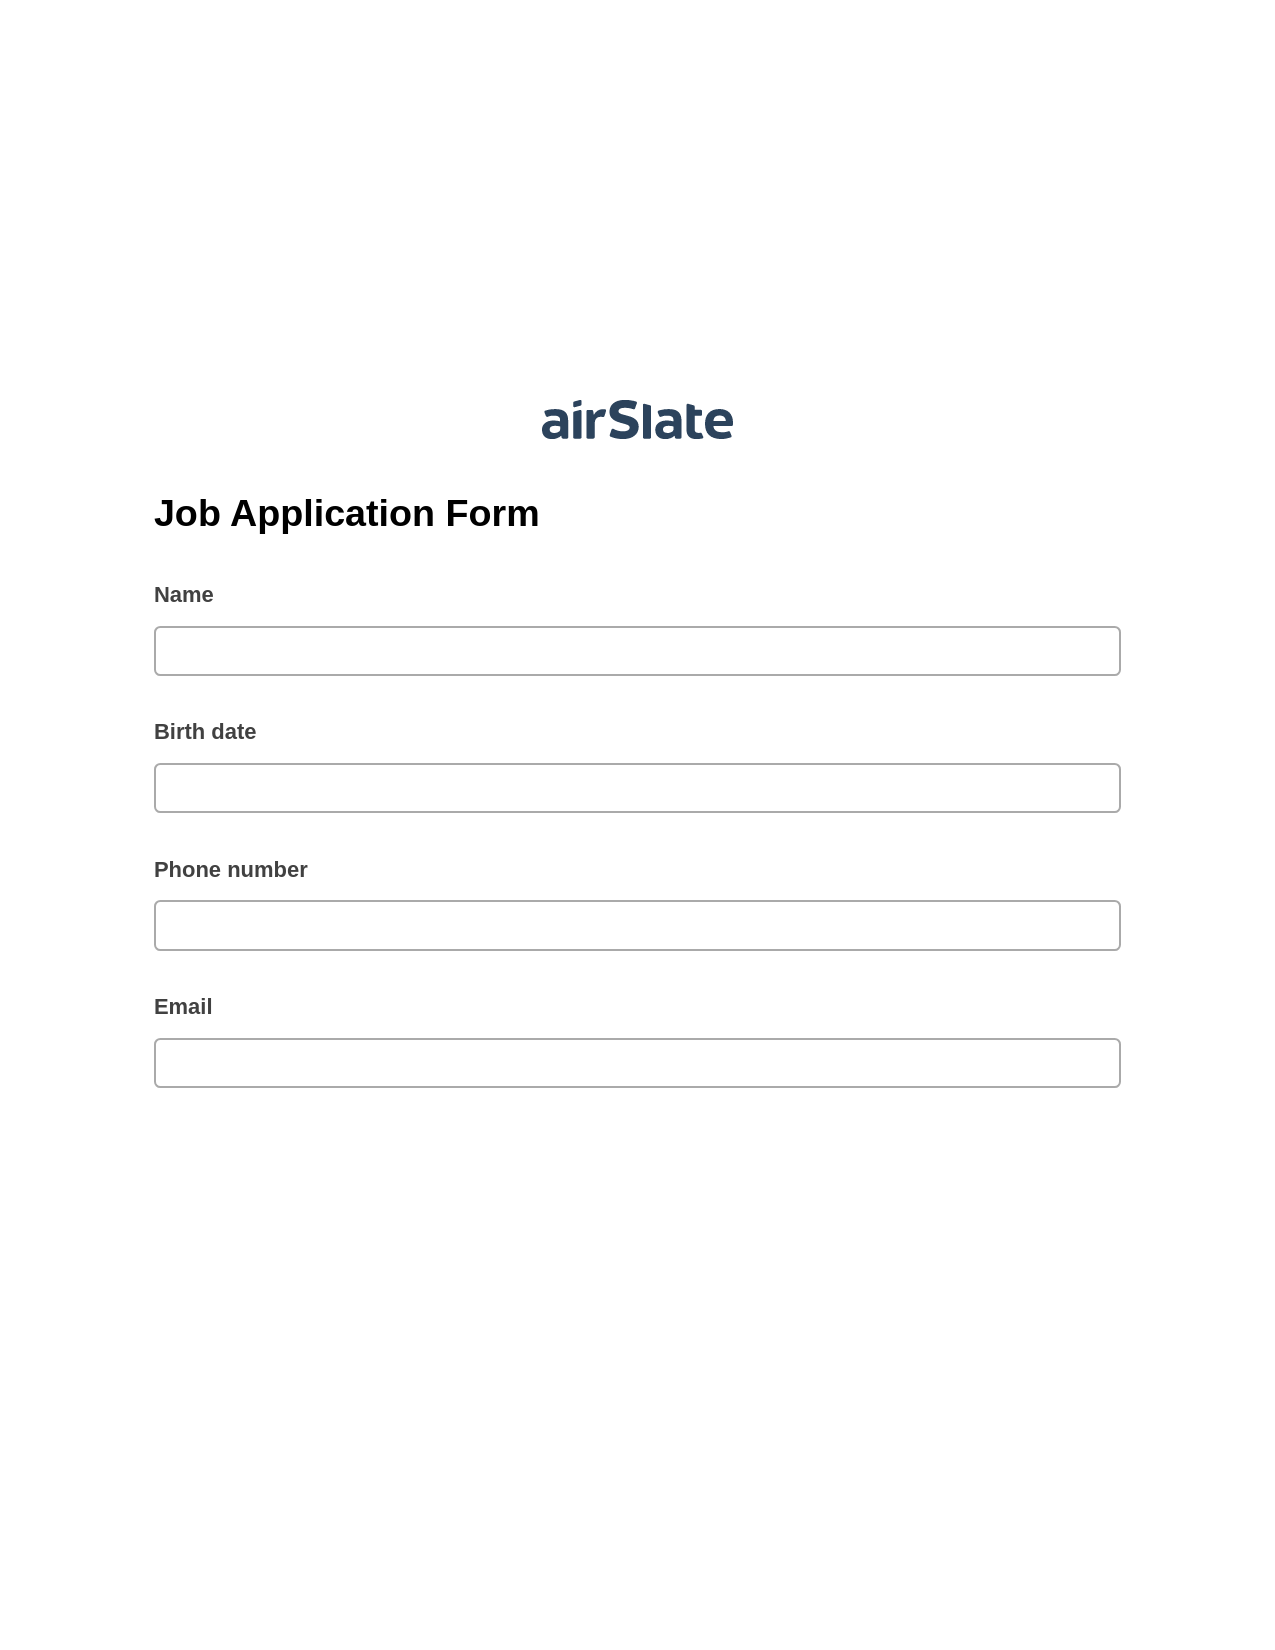 Job Application Form Pre-fill from Excel Spreadsheet Bot, Add Tags to Slate Bot, Export to MySQL Bot